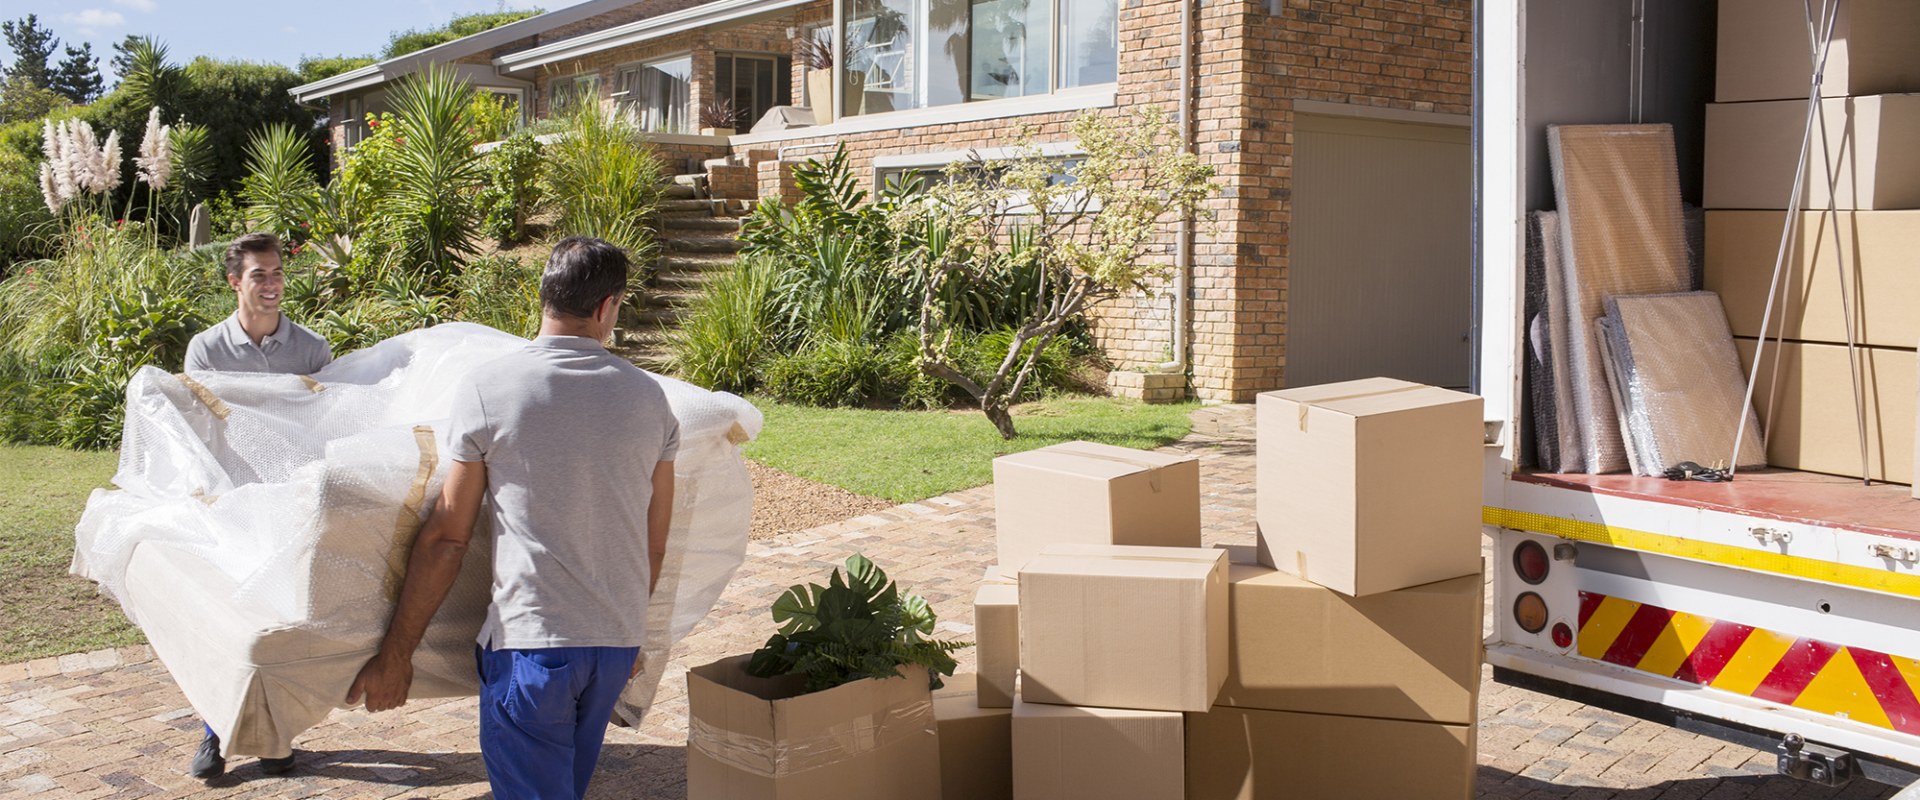 When is the Best Day to Hire Movers?